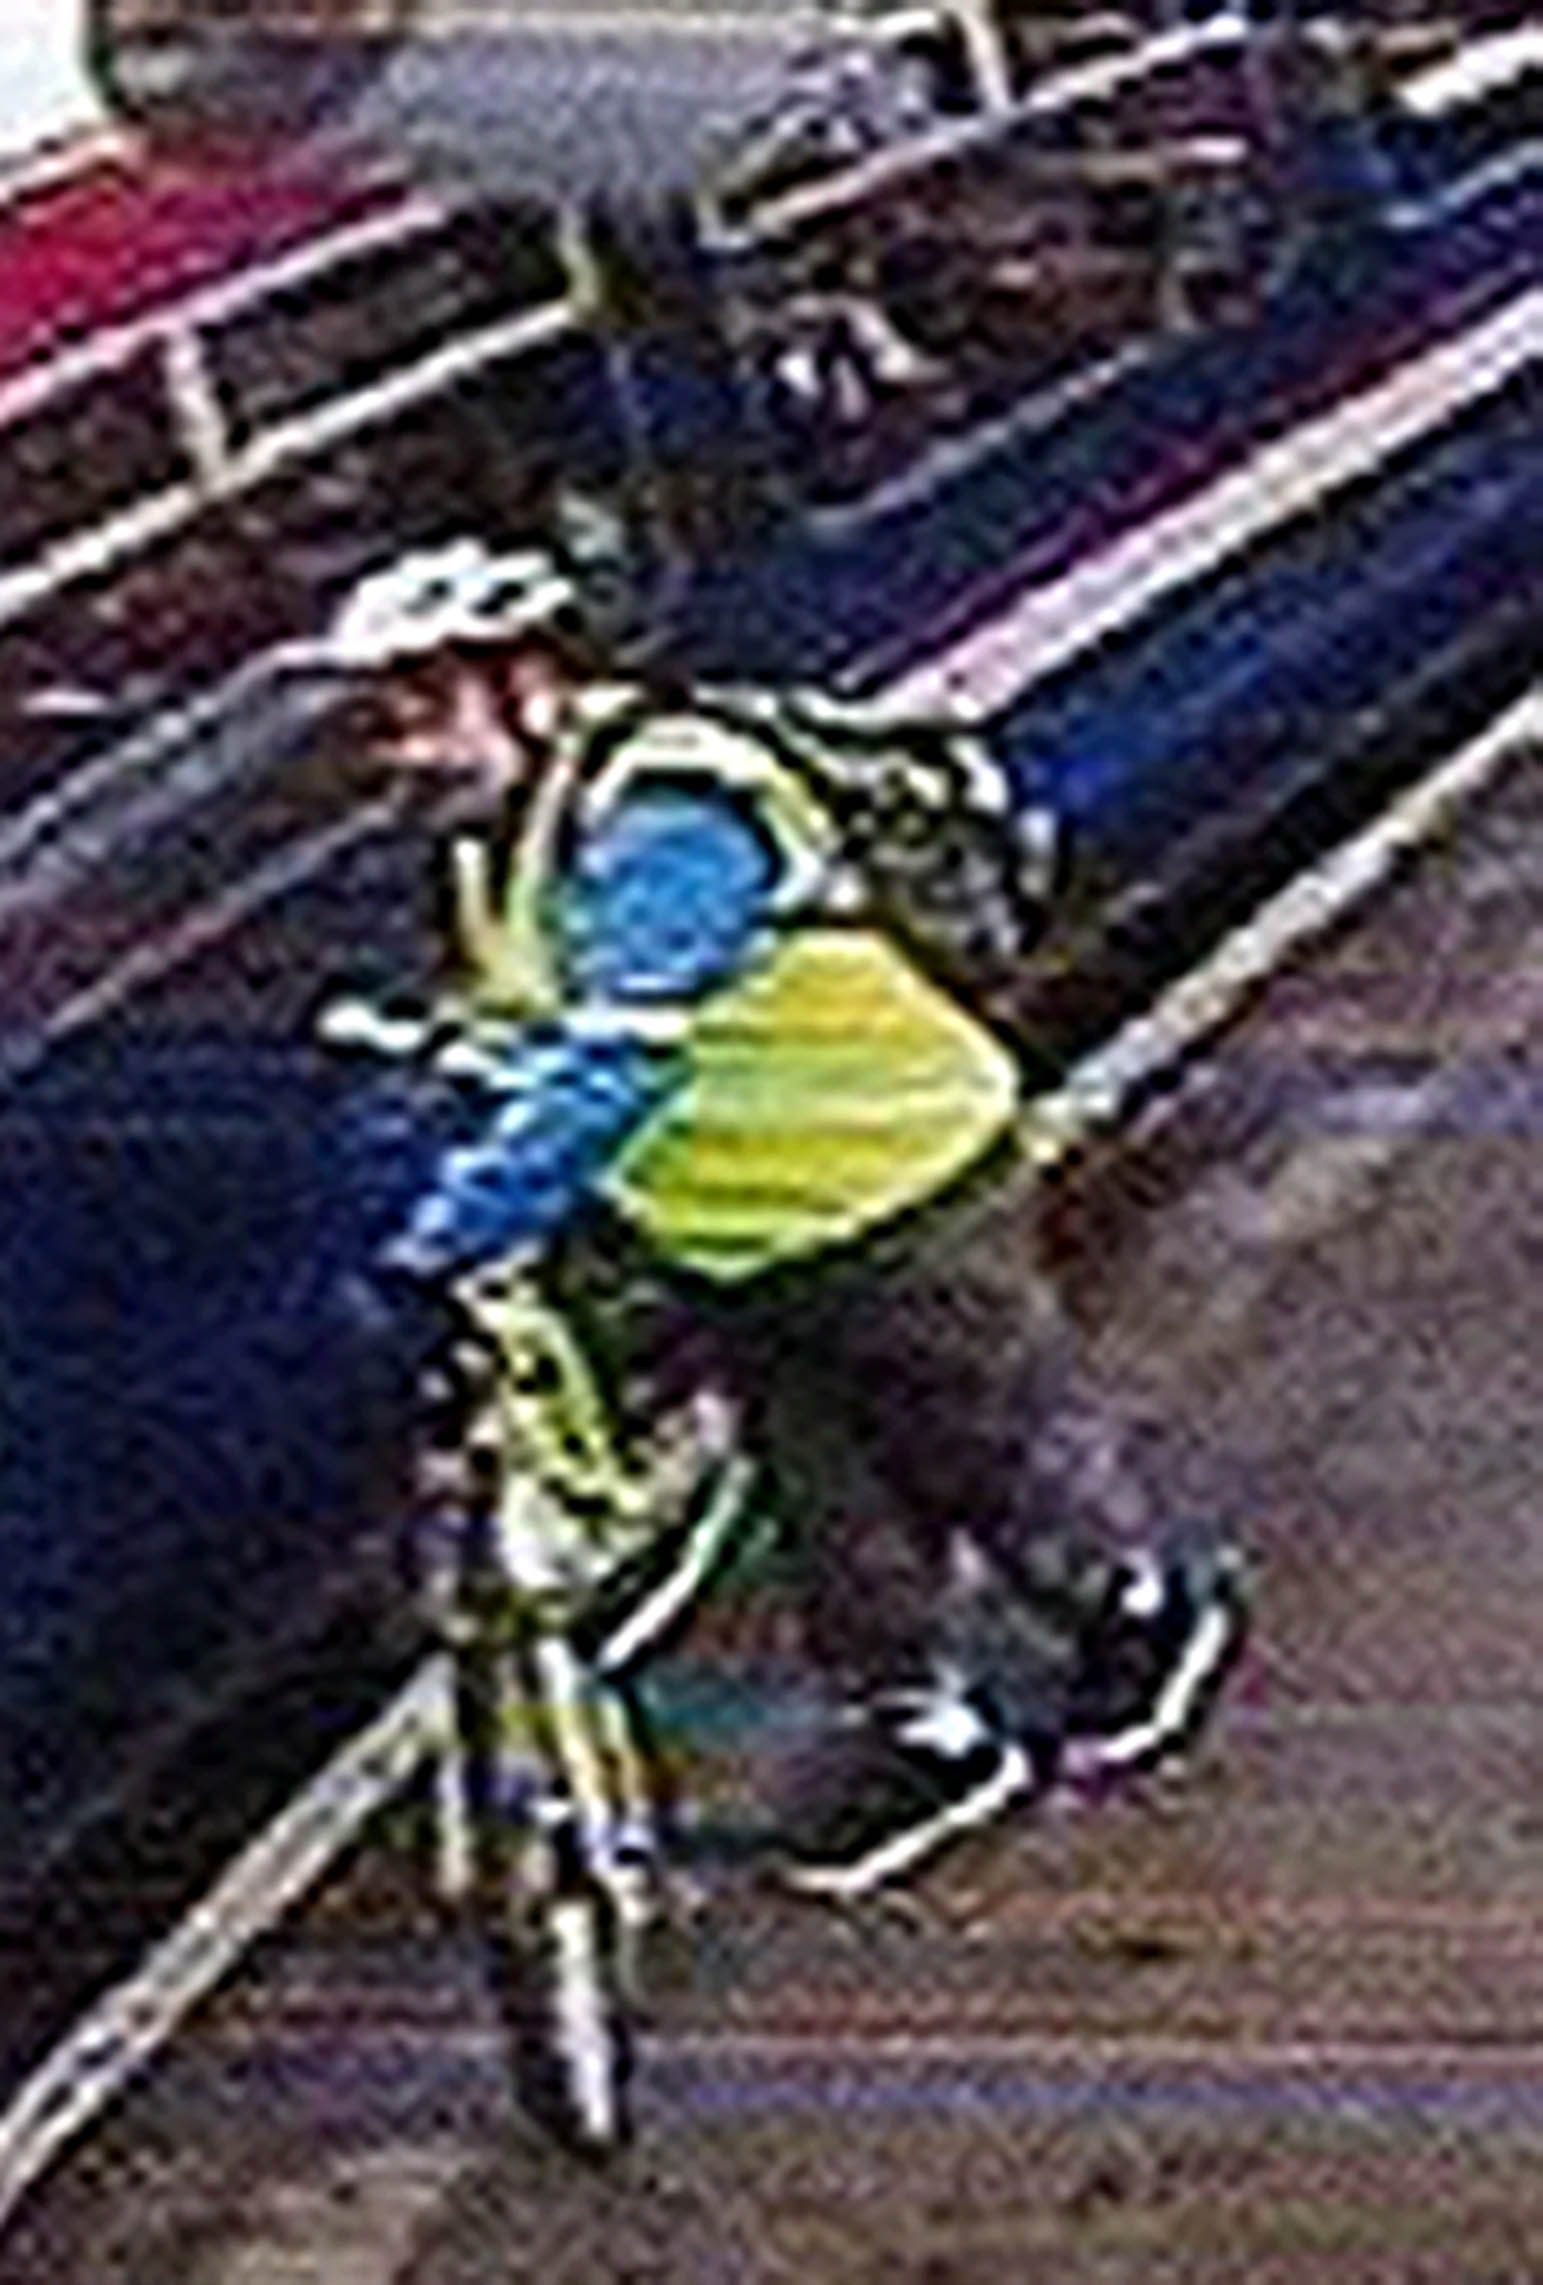 <em>Tony Parsons was last seen on the charity bike ride and was reported missing on October 2, 2017. by Police Scotland</em>.”/><span
class=